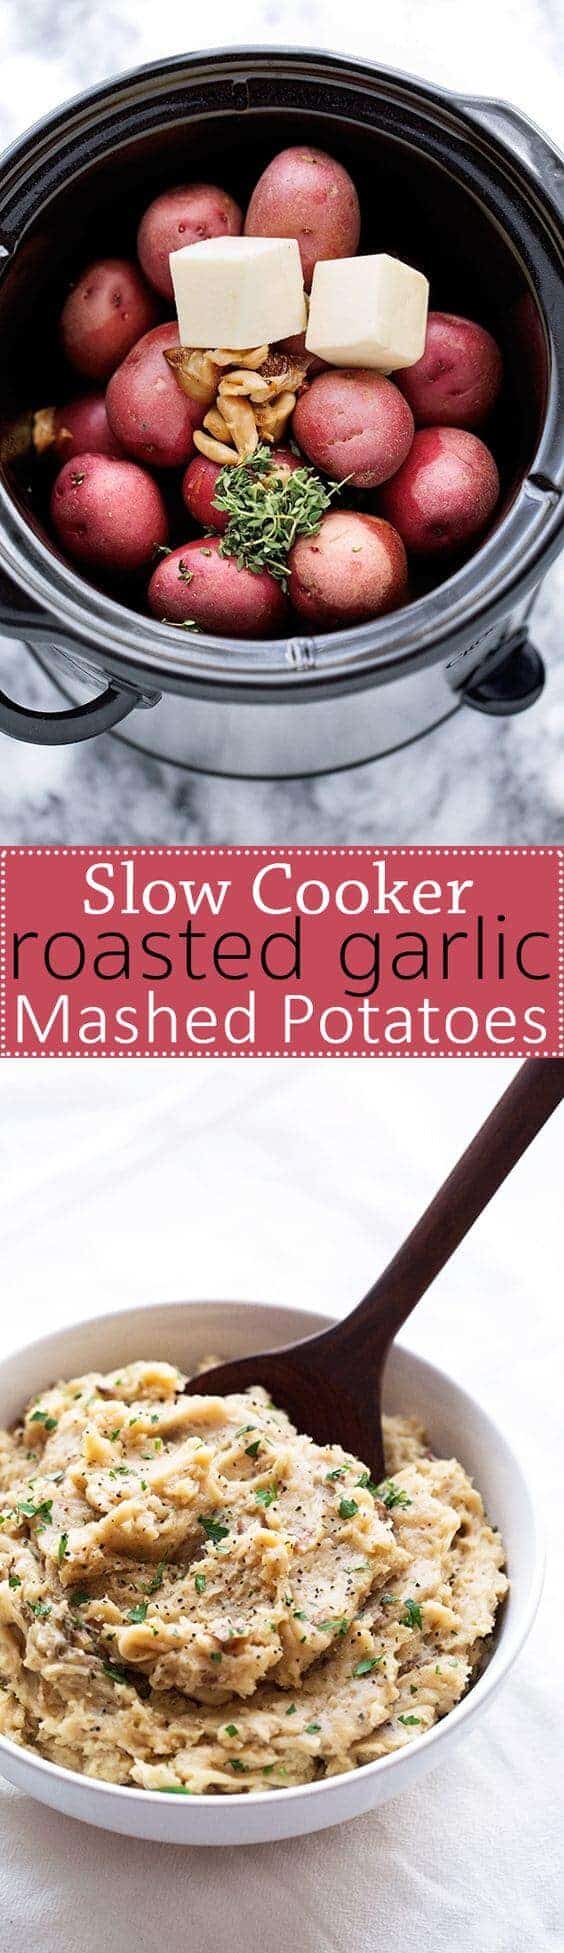 Slow Cooker Roasted Garlic Mashed Potatoes by Little Spice Jar